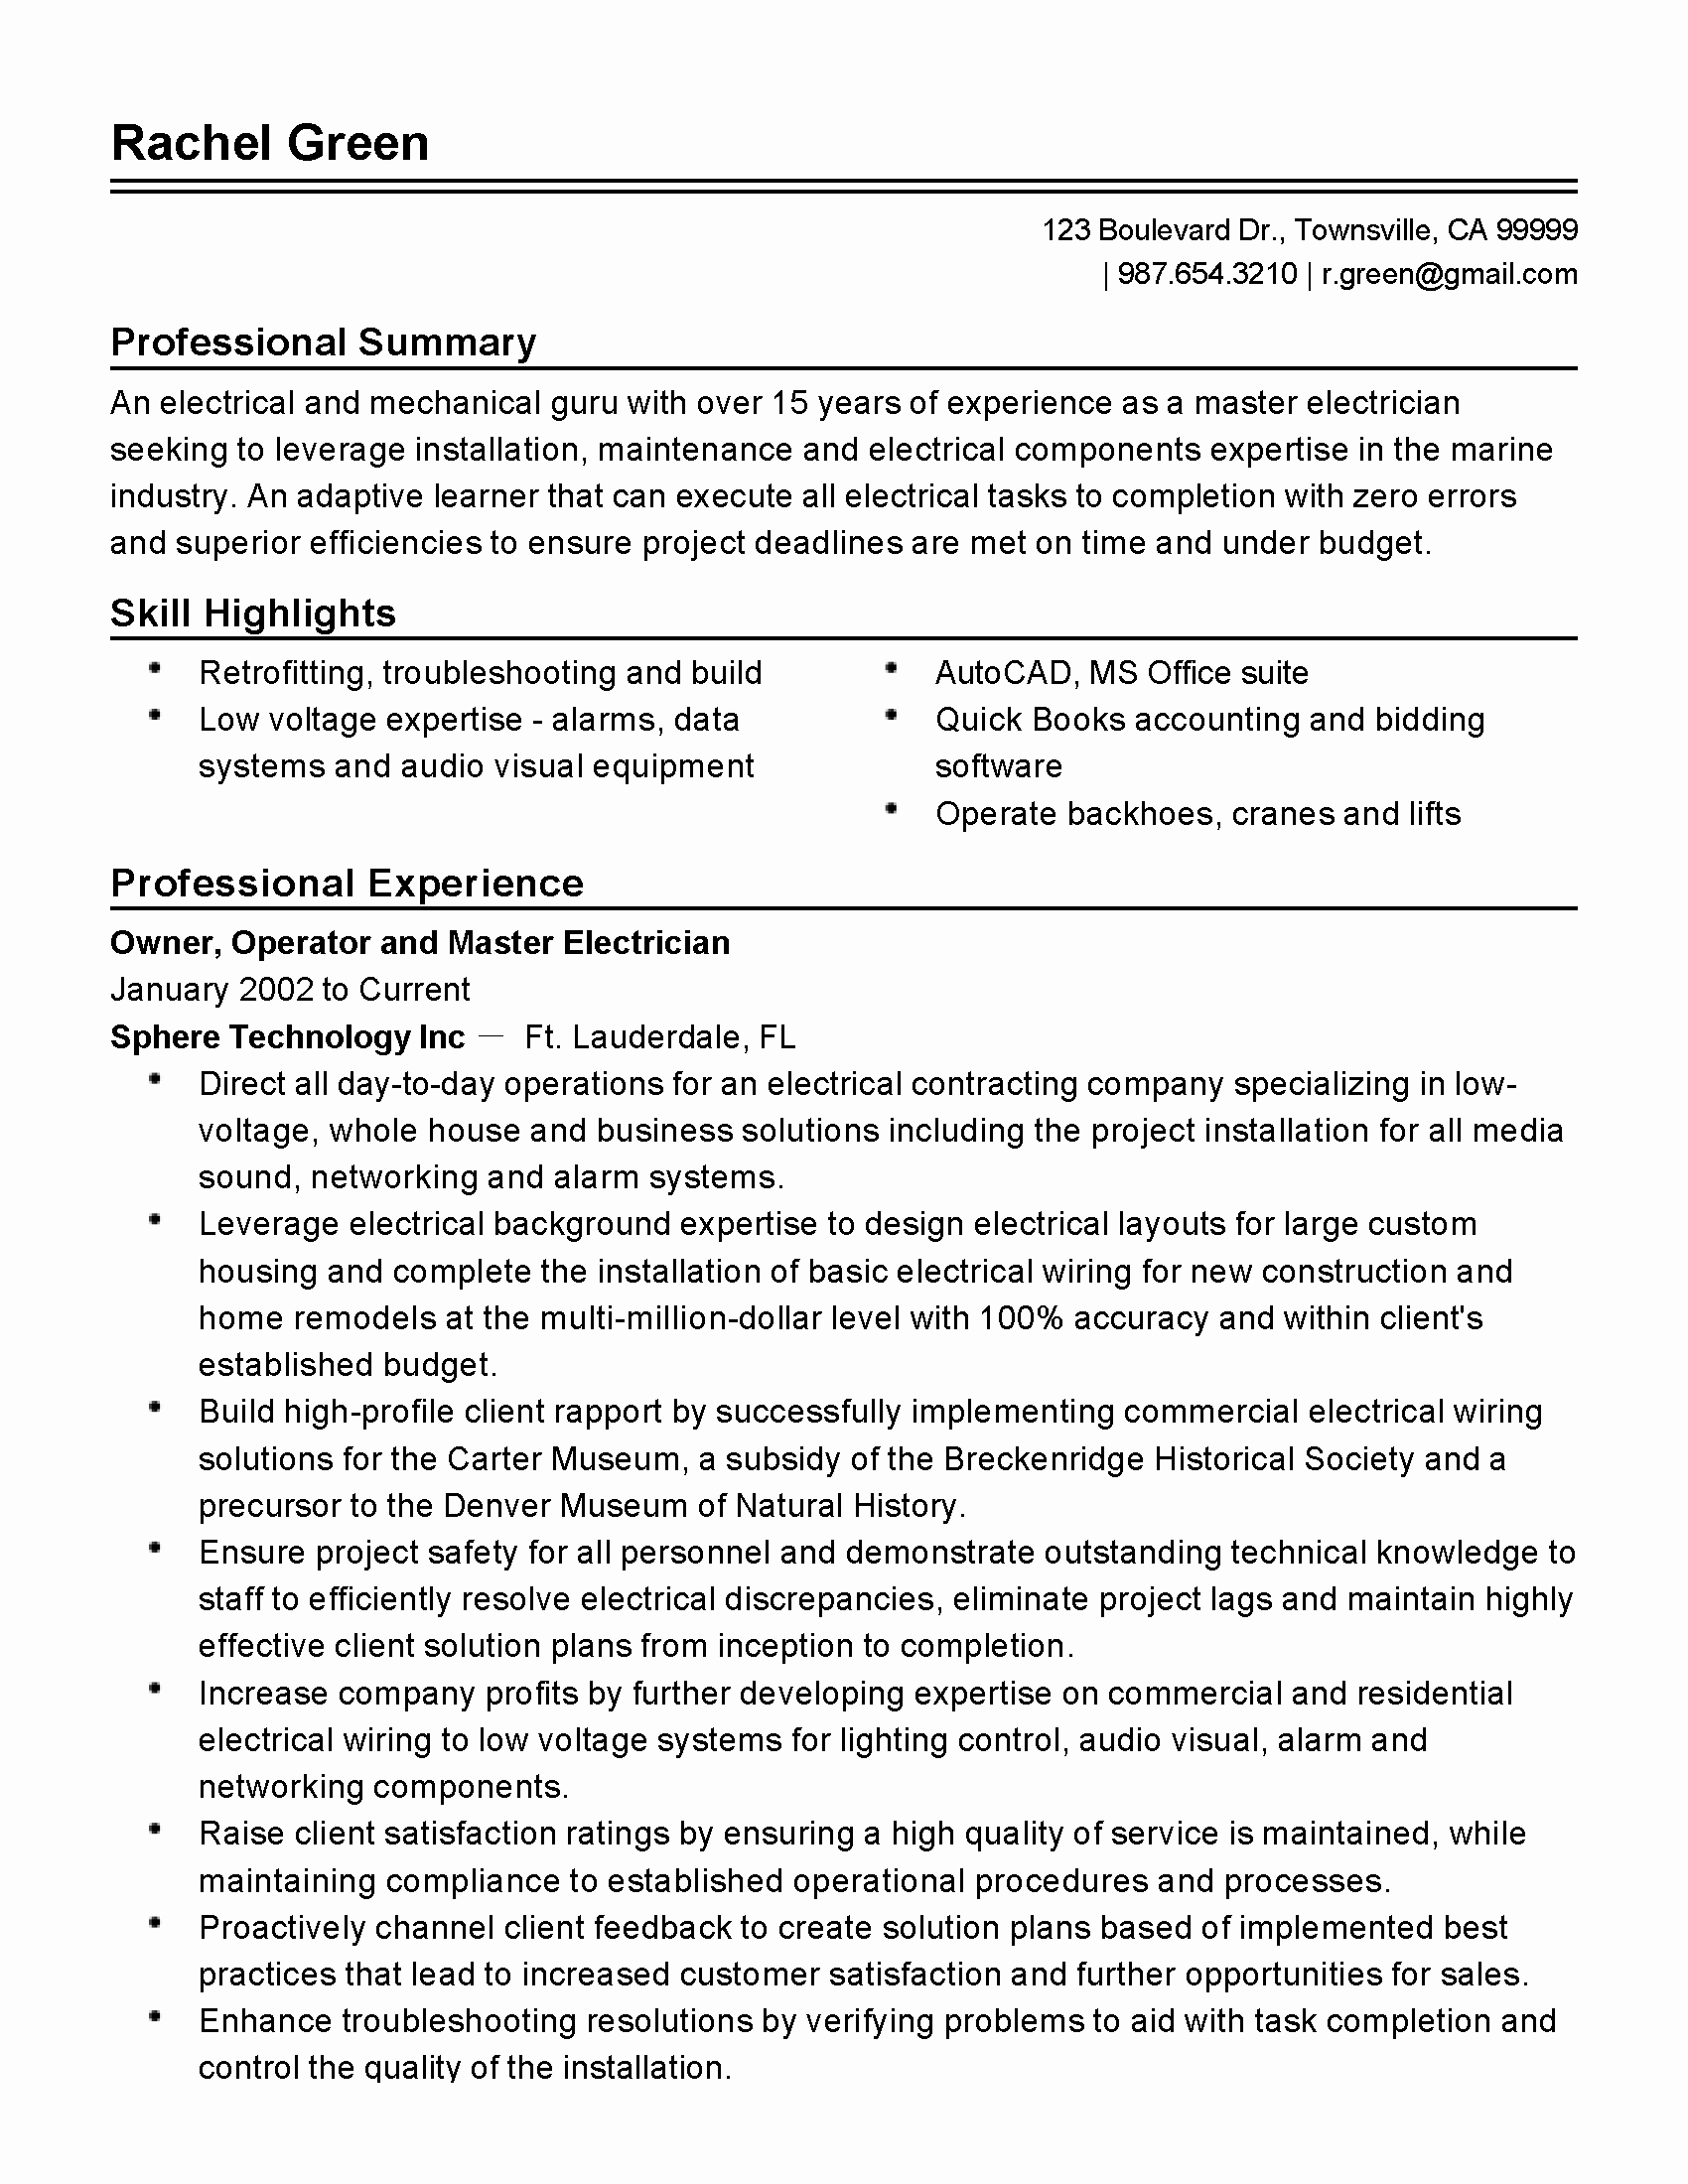 Sample Resumes for Electrician Luxury Professional Master Electrician Templates to Showcase Your